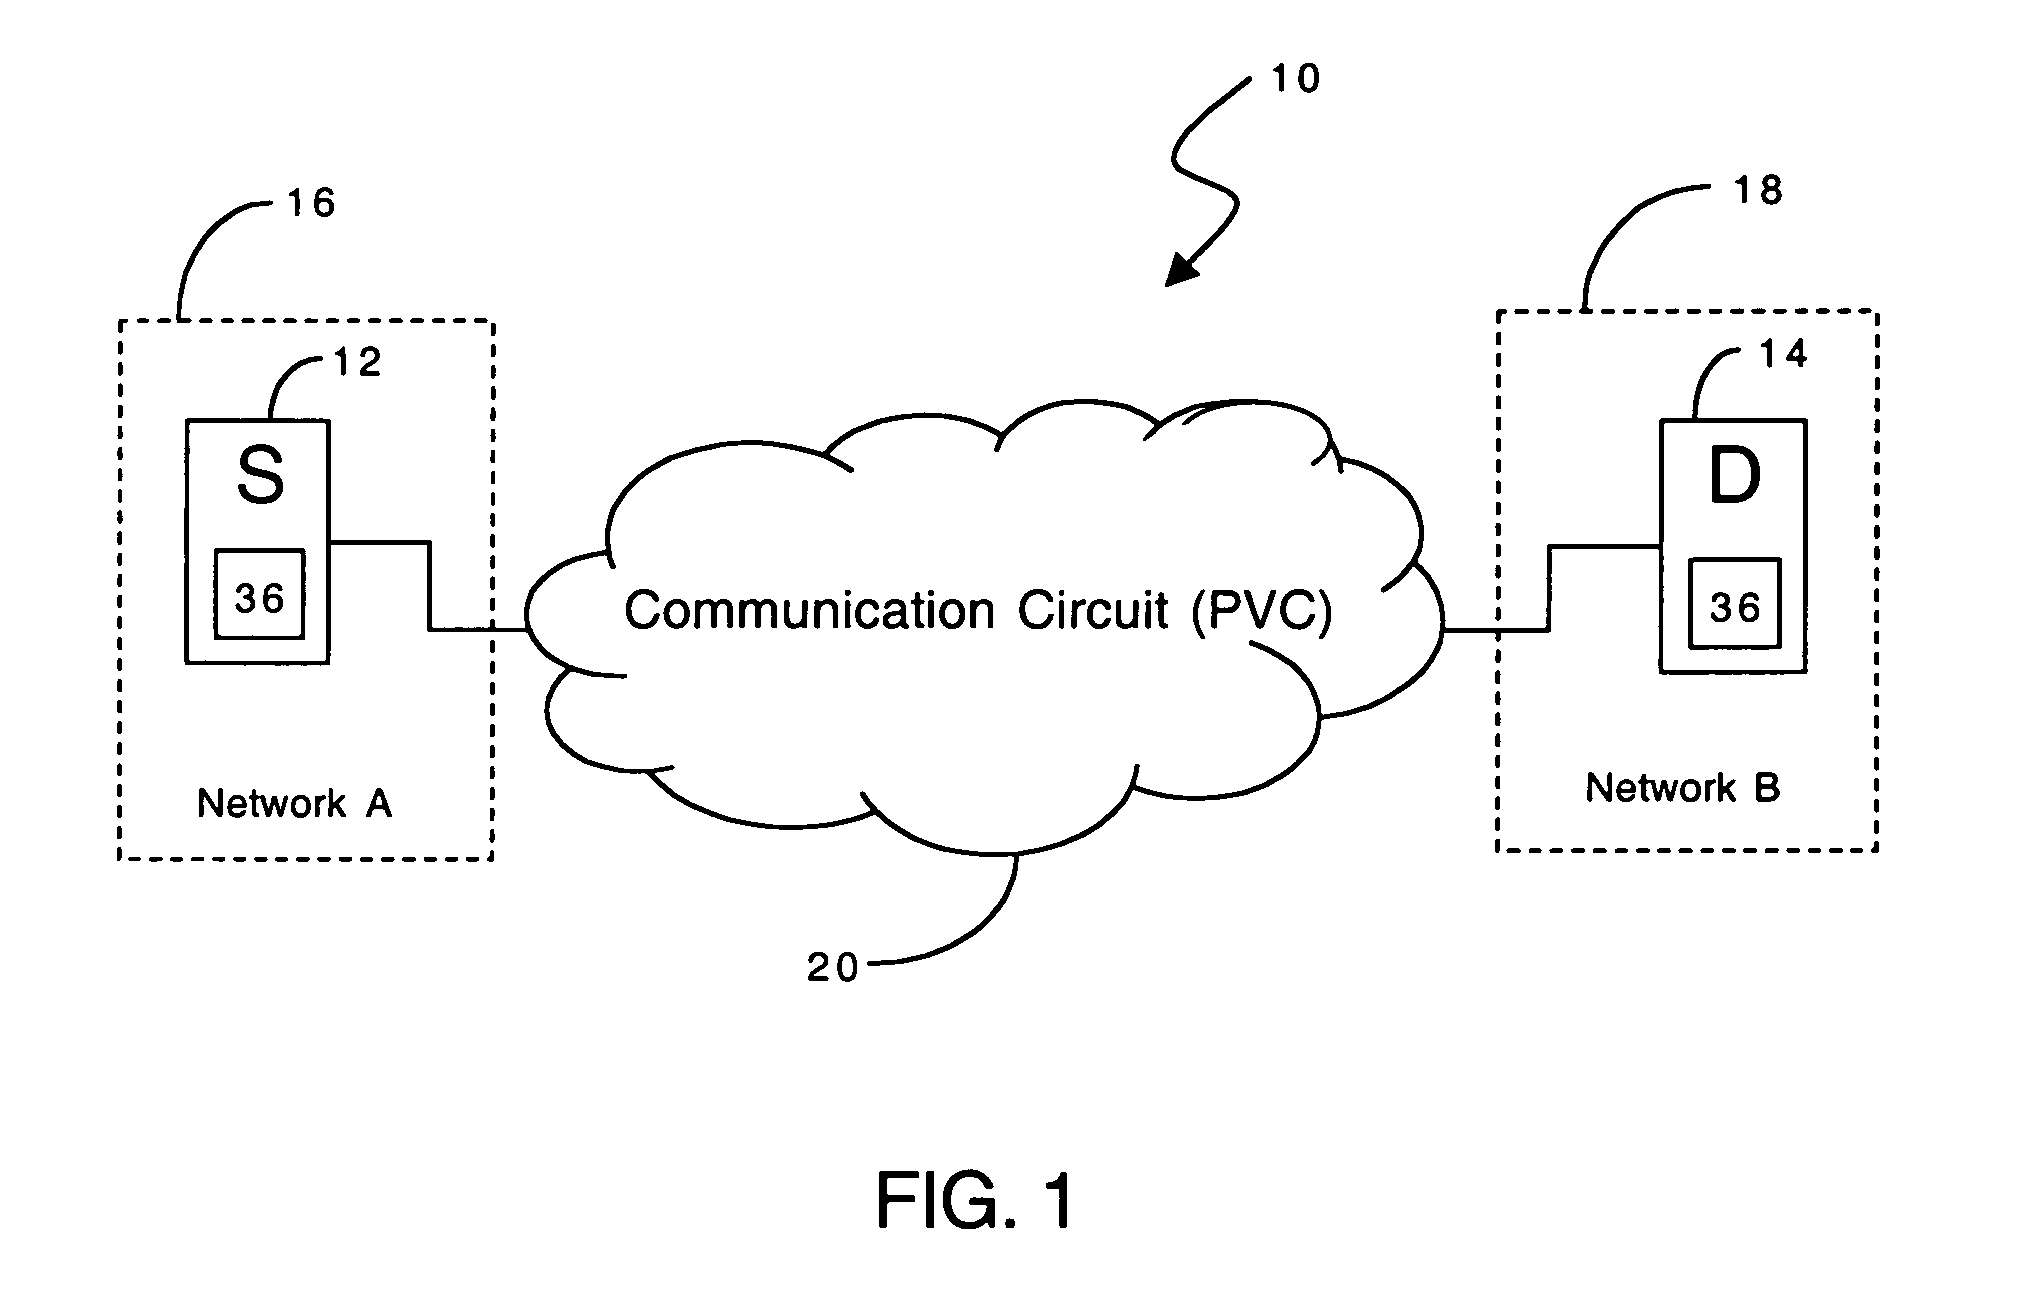 Method and apparatus for calculating packet loss for a communication circuit